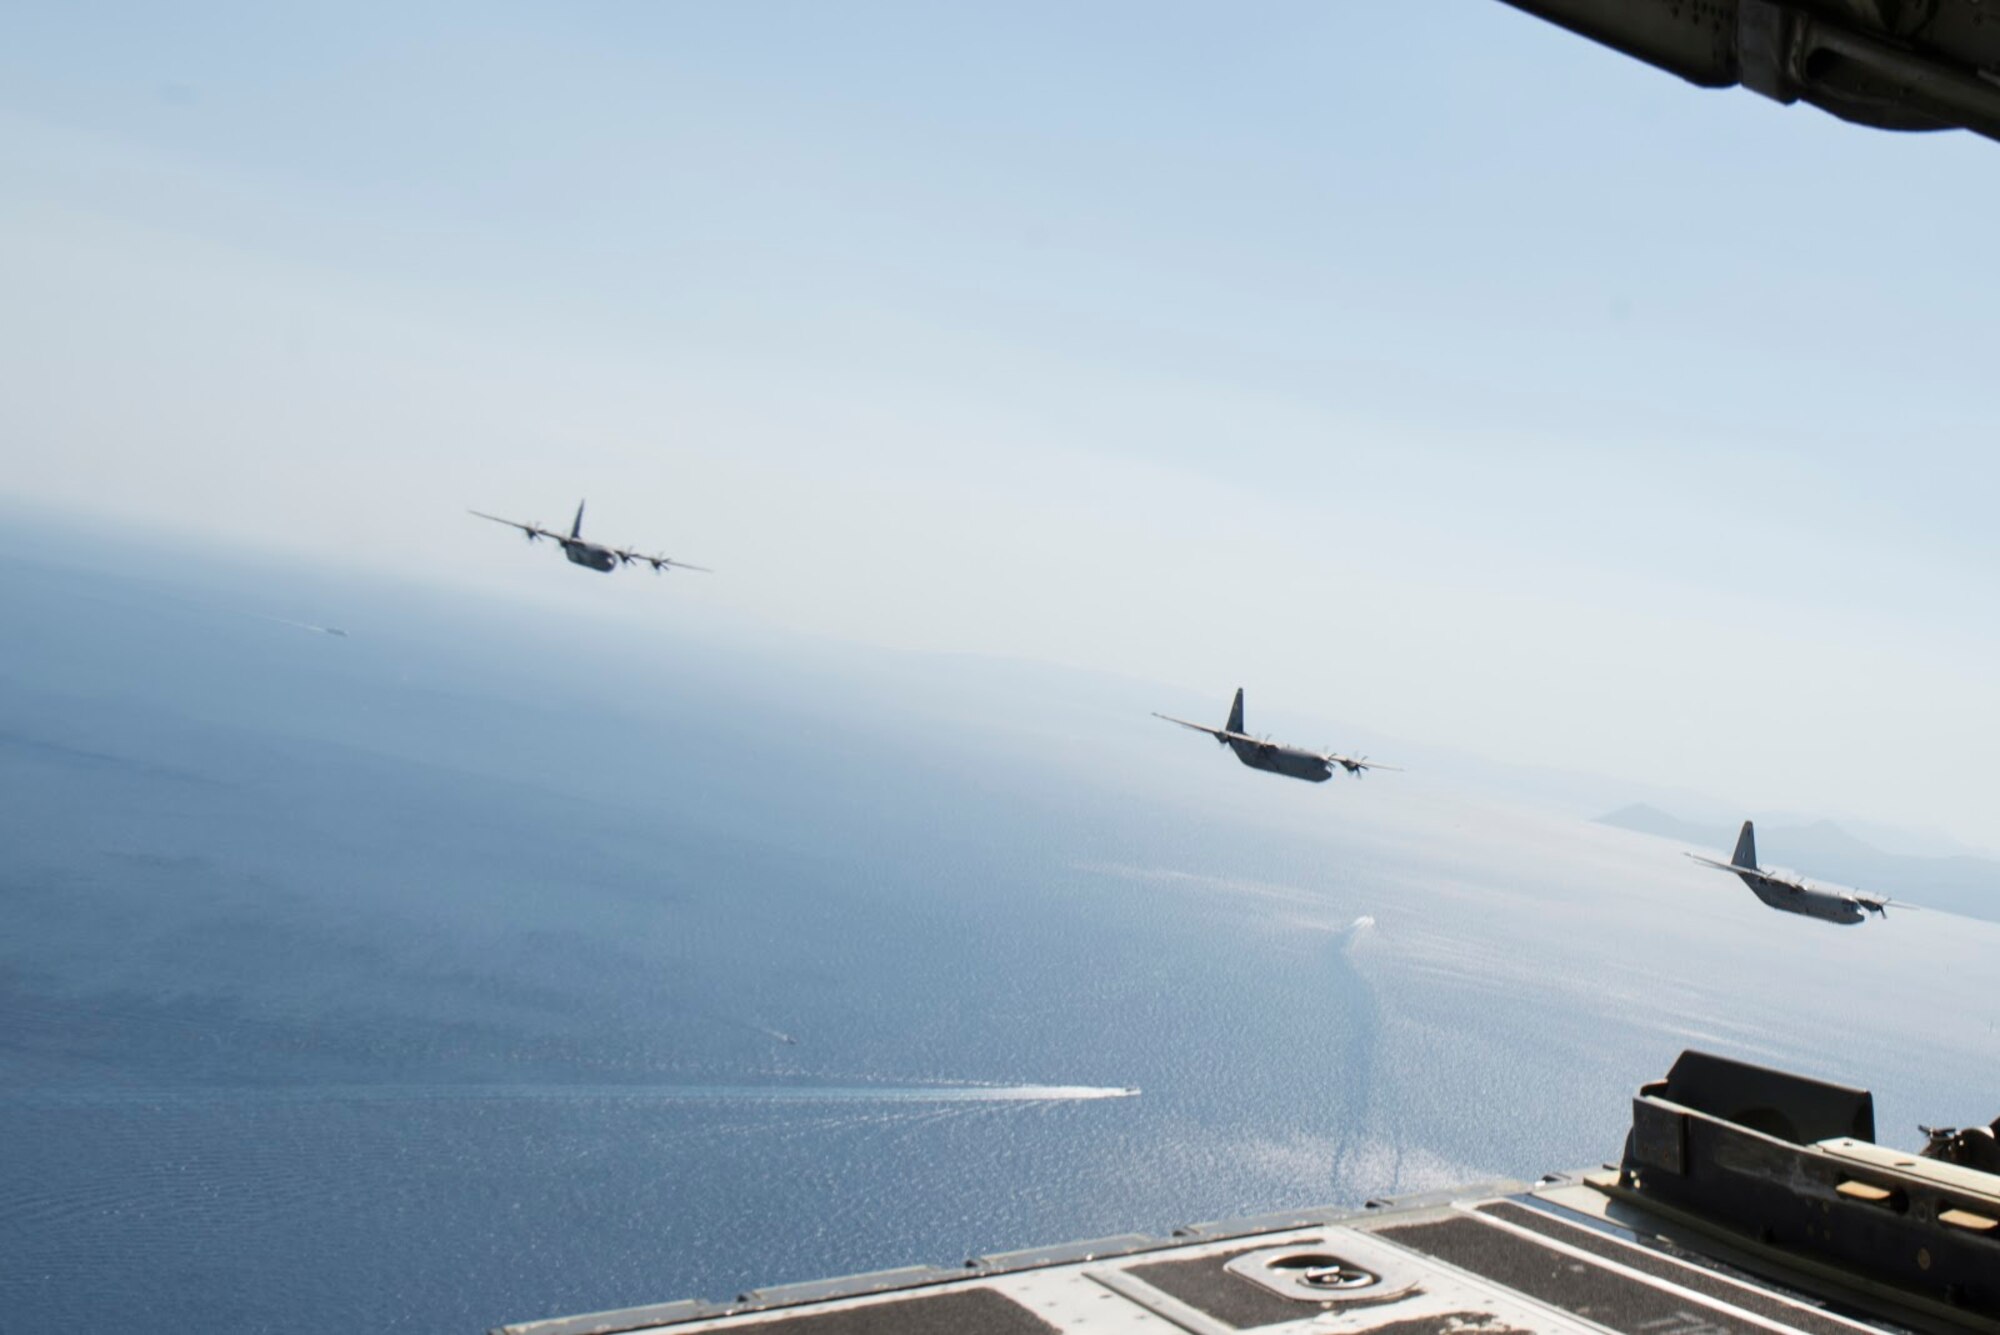 C-130J Super Hercules aircraft, one from the Hellenic armed forces and two assigned to the 86th Airlift Wing, fly over Megara Bay, Greece, during Operation Stolen Cerberus VII, Sept. 11, 2020. The exercise is designed to enhance readiness and demonstrate a shared commitment to a peaceful, stable and secure Europe. (U.S. Air Force photo by Airman 1st Class Taylor D. Slater)